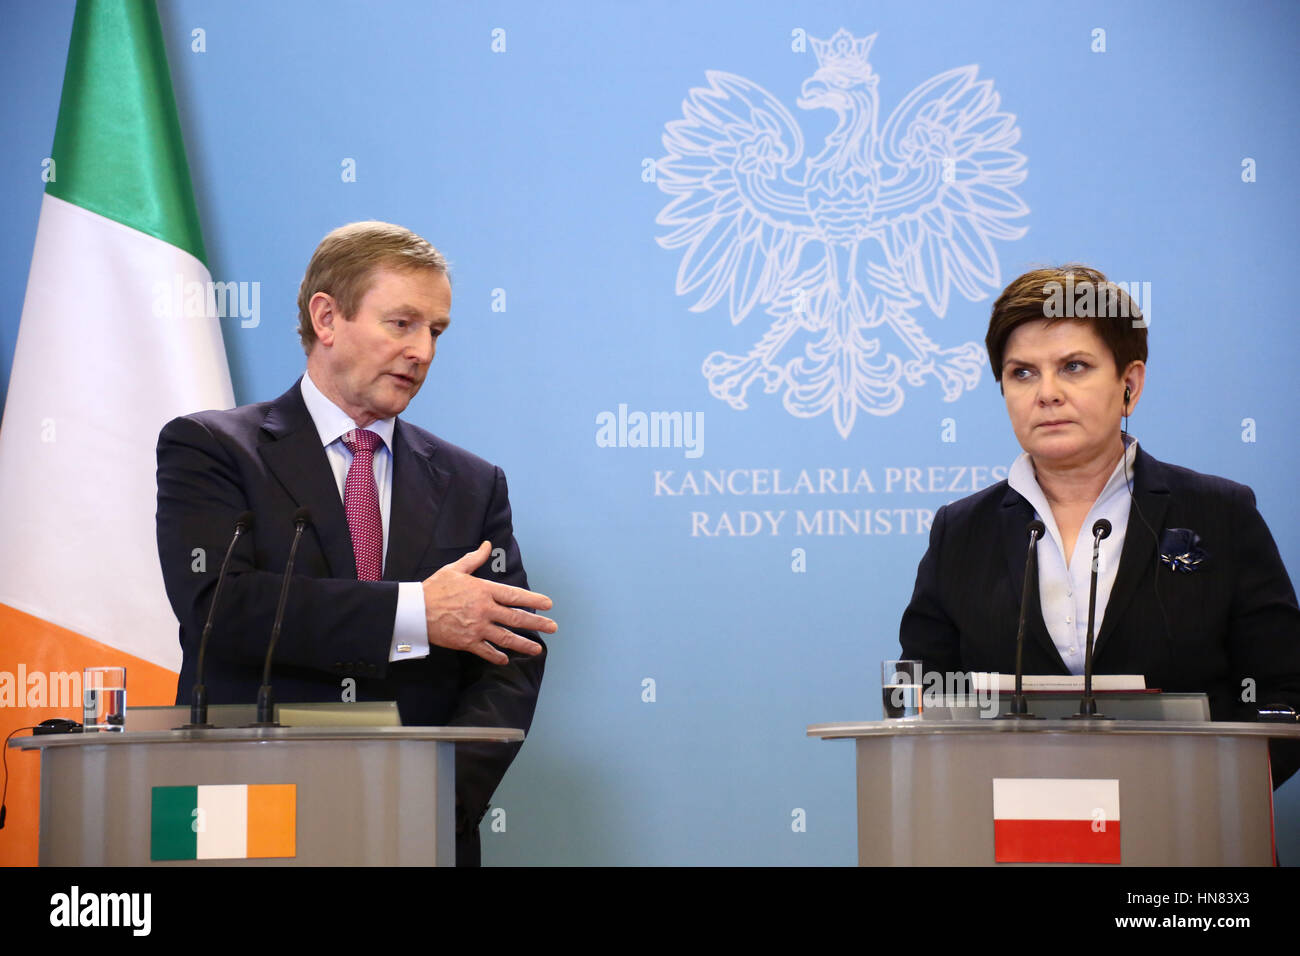 Warsaw, Poland. 9th Feb, 2017. Prime Minister Beata Szydlo held joint press briefing with Irish Prime Minister Enda Kenny in Warsaw. Credit: Jake Ratz/Alamy Live News Stock Photo